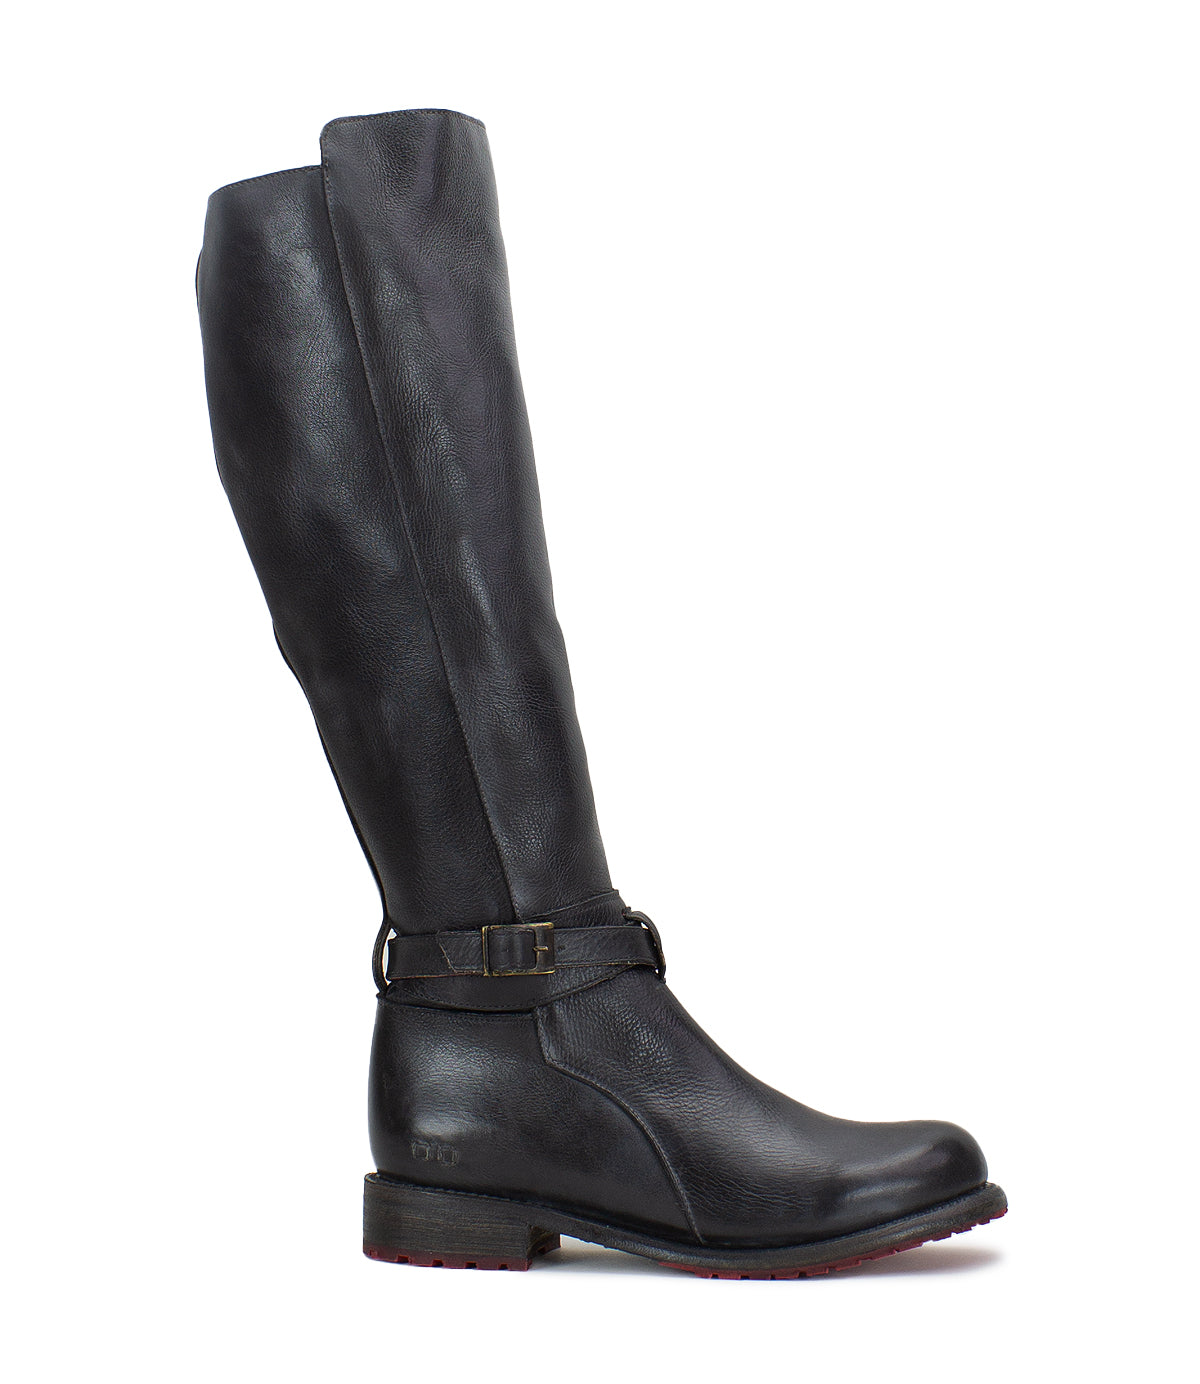 A women's Bristol boot by Bed Stu, made of black leather with a buckle on the side.